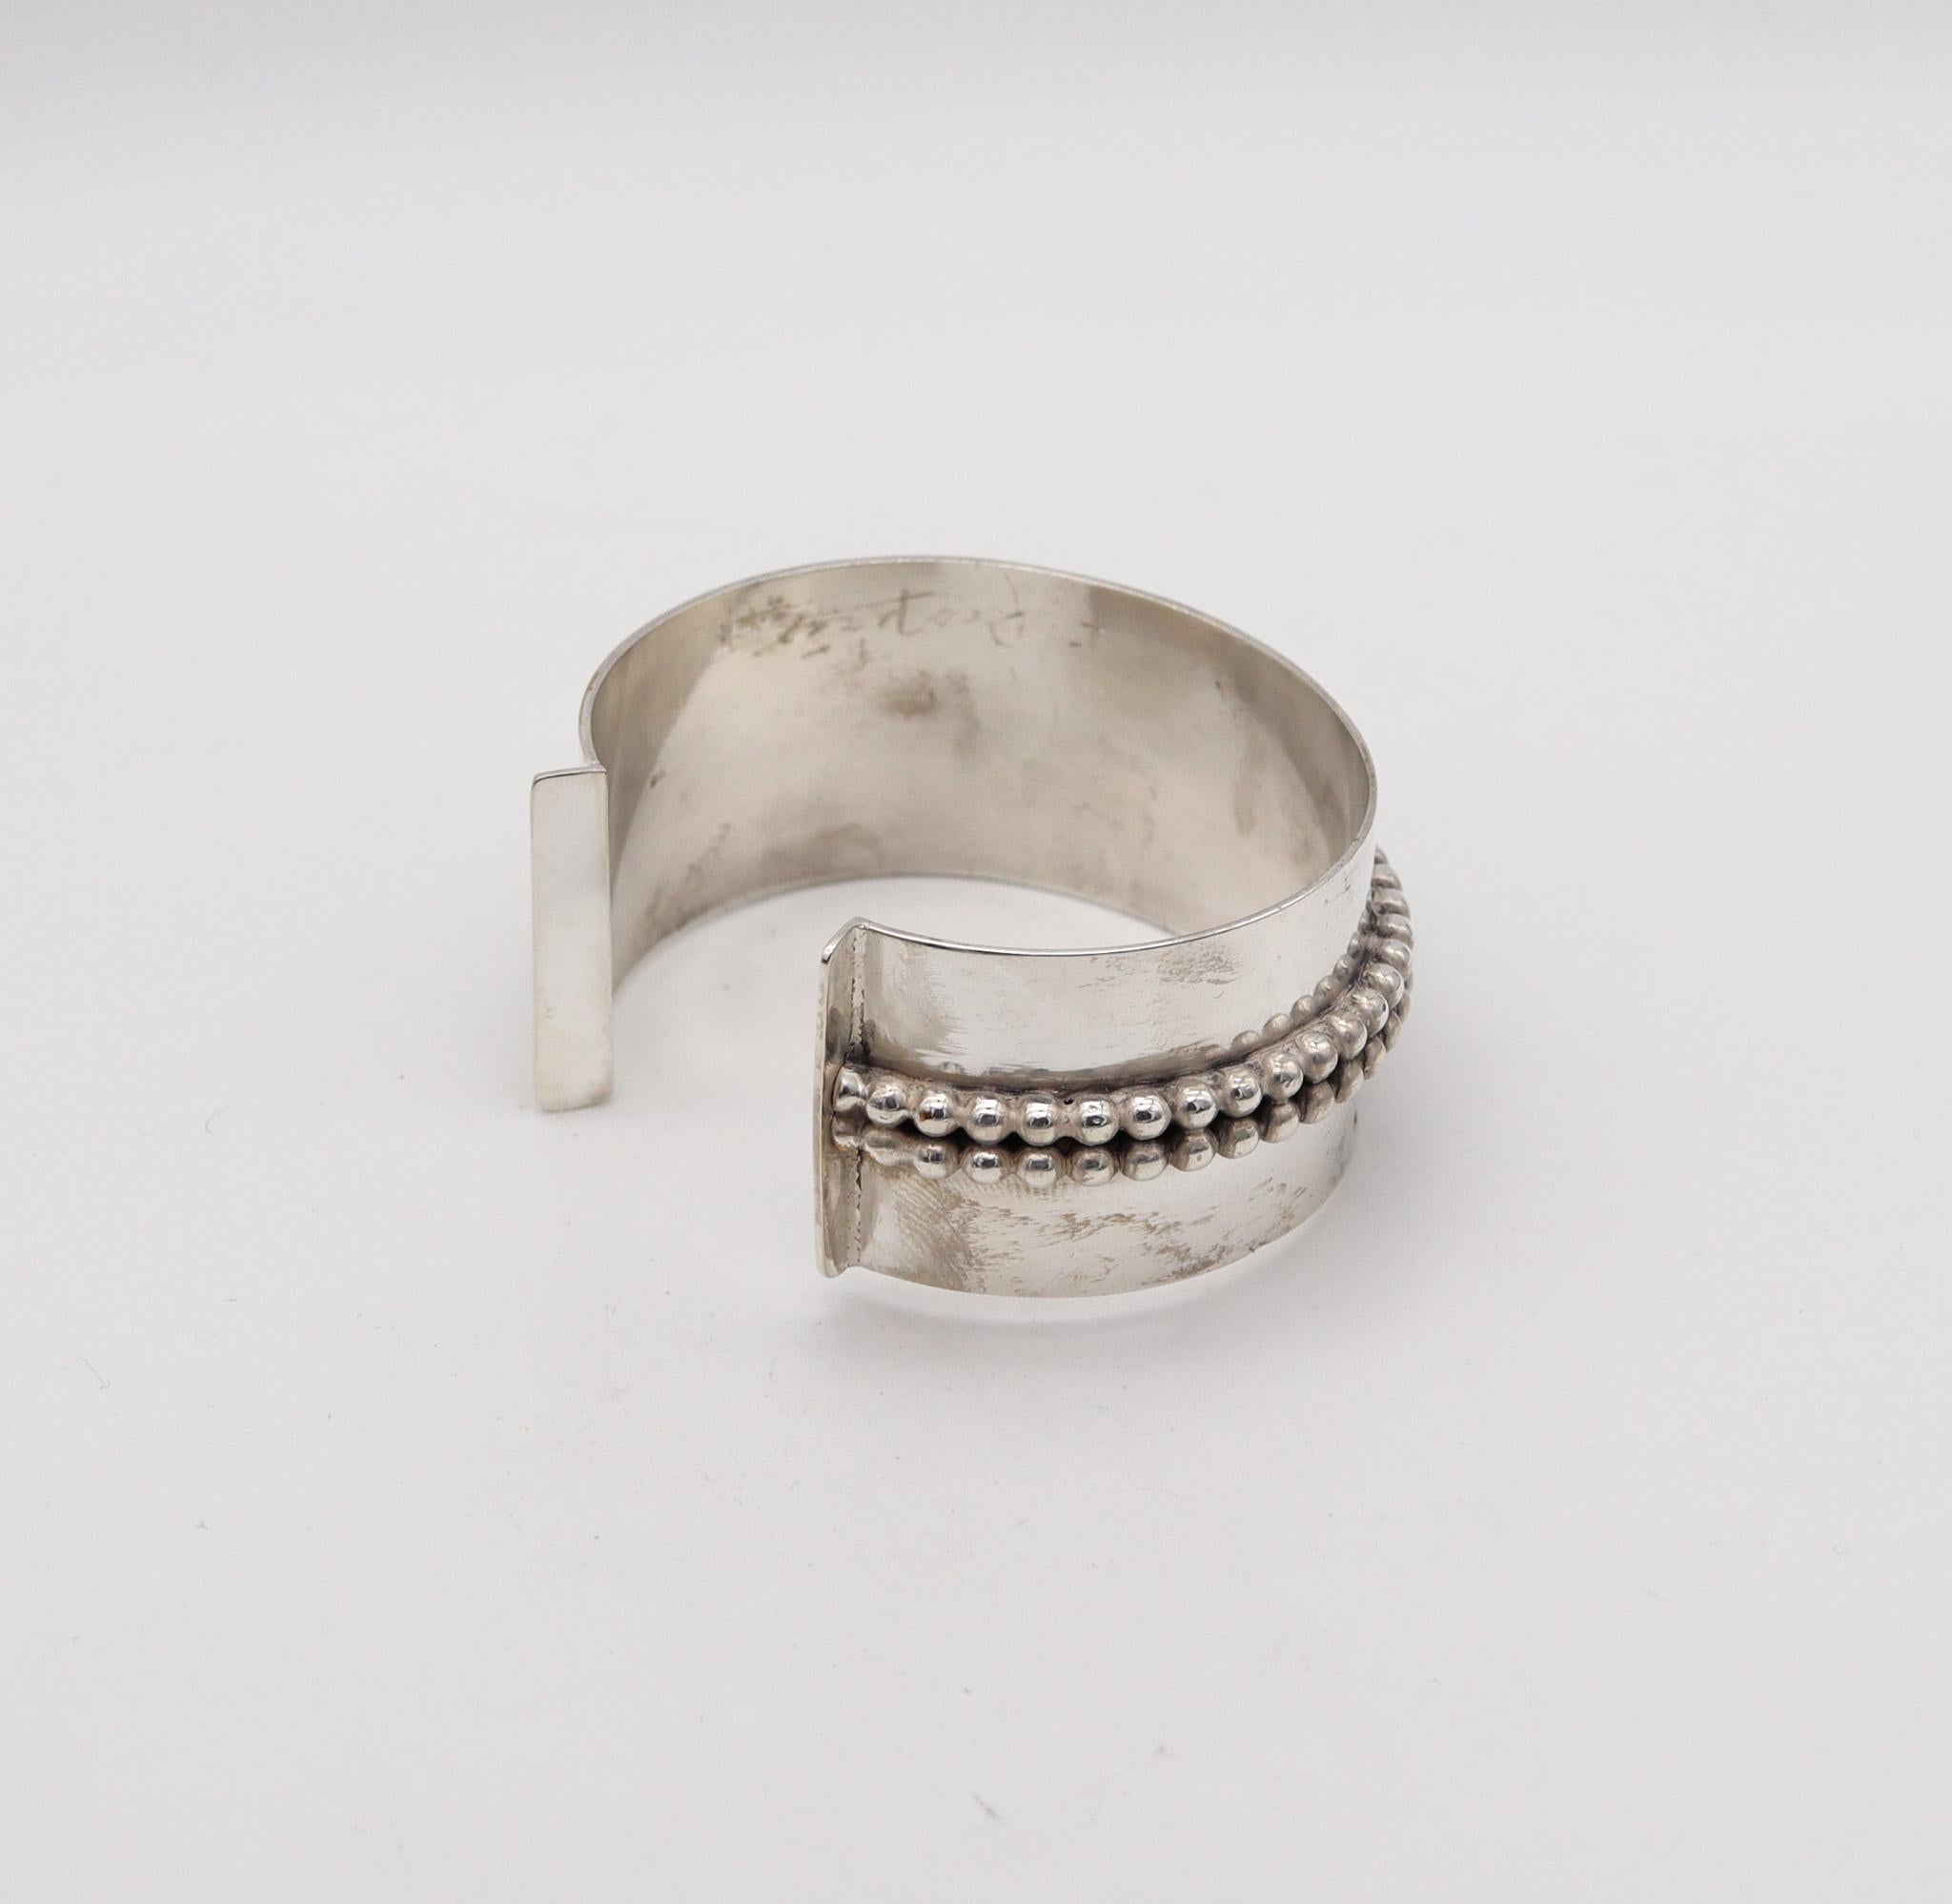 Jean Després 1960 Paris Artistic Cuff Bracelet .800 Silver With Dotted Patterns In Excellent Condition For Sale In Miami, FL